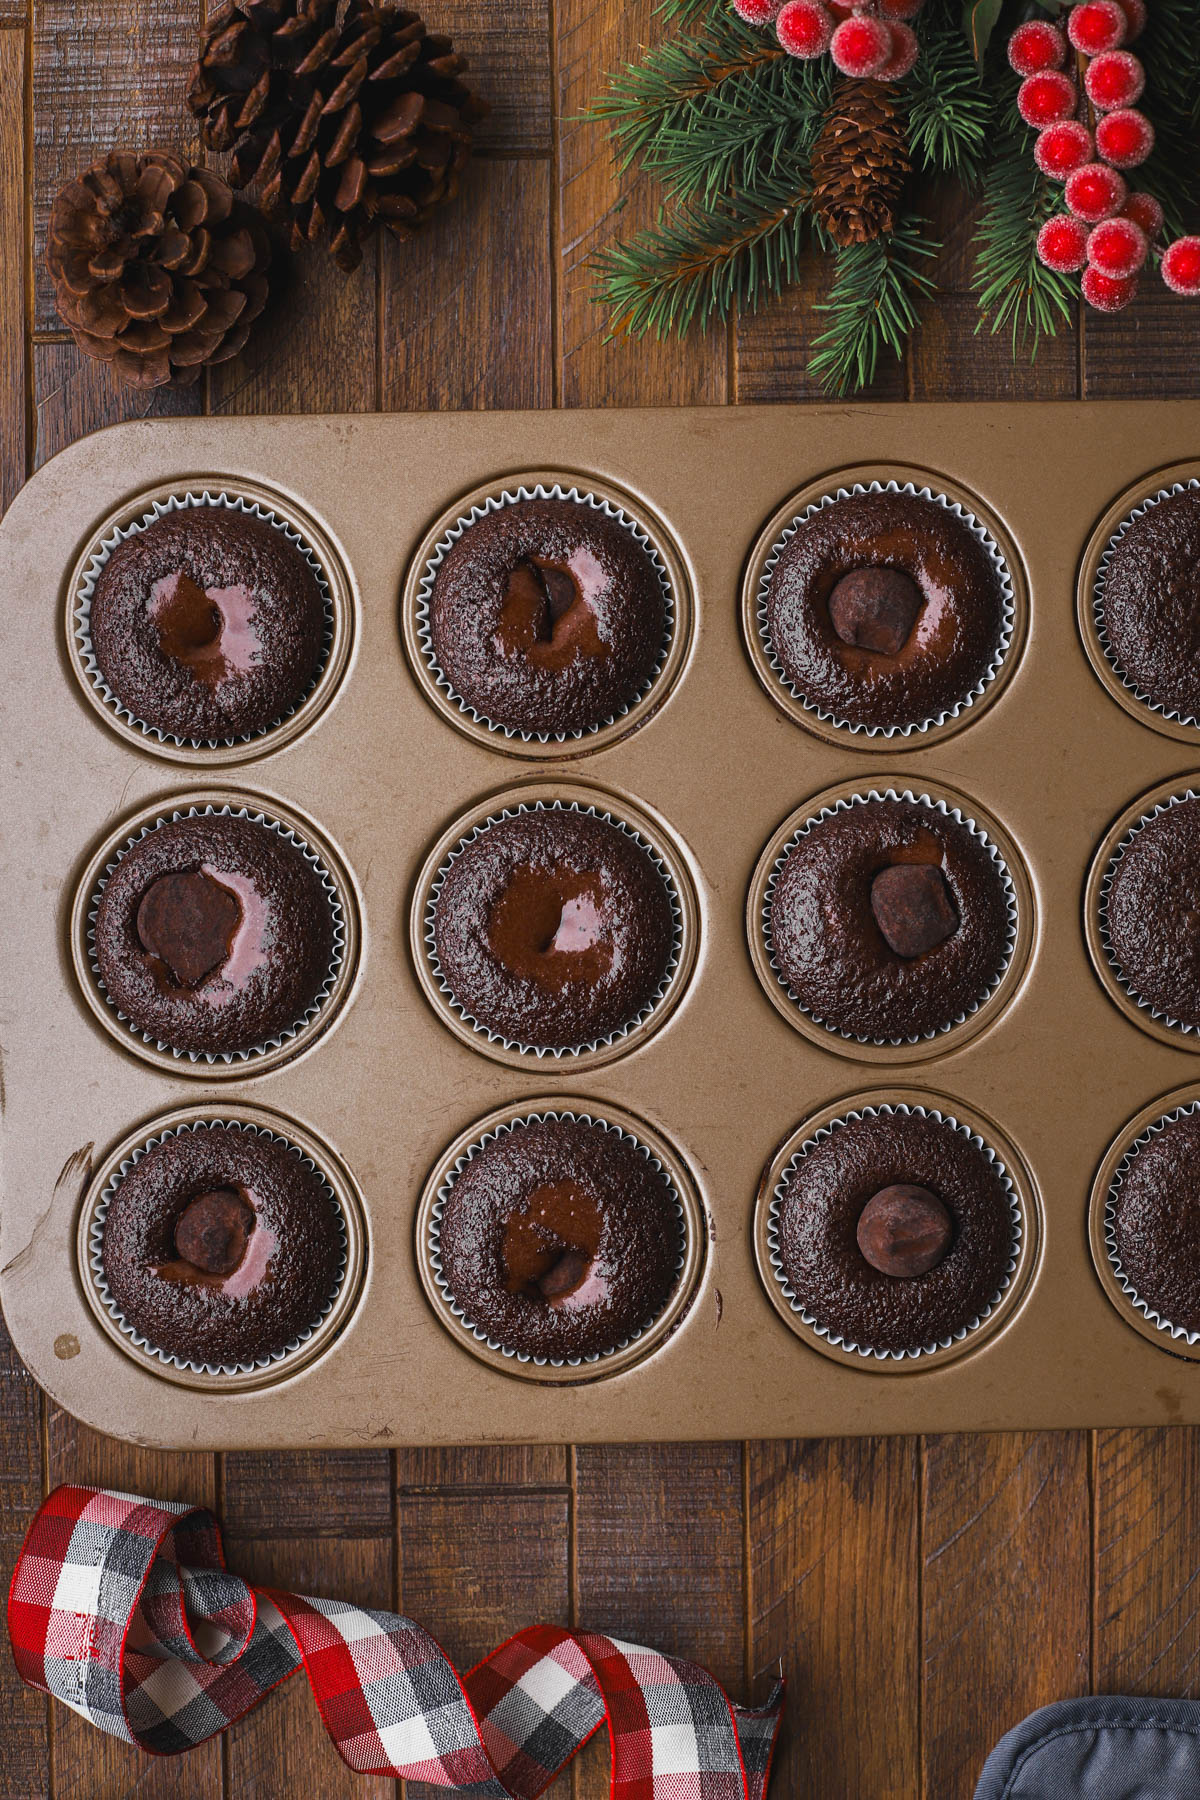 Par-baked cupcakes with chocolate truffles inside.  